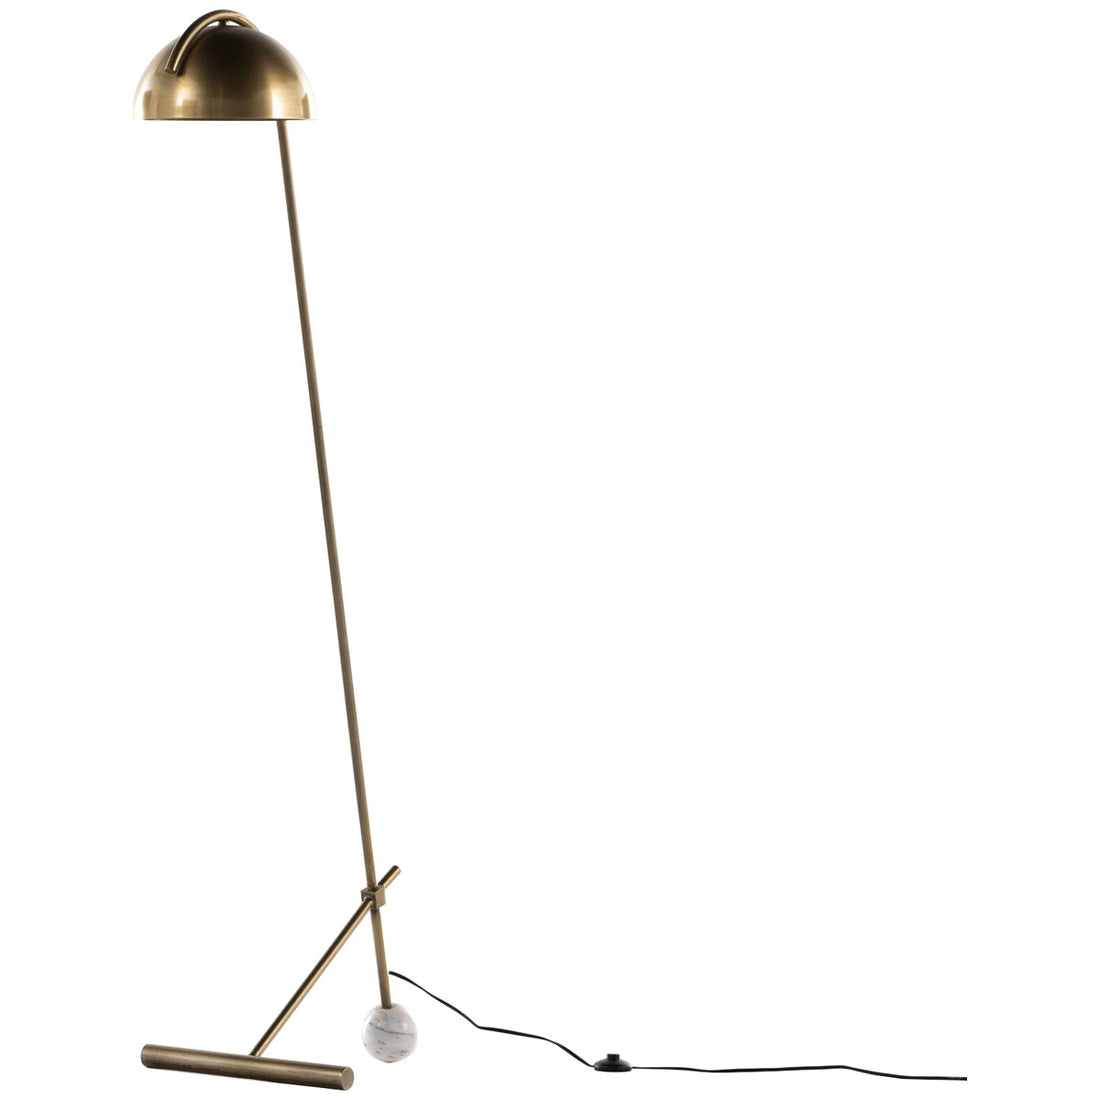 Four Hands Asher Becker Floor Lamp - Charcoal and White Marble